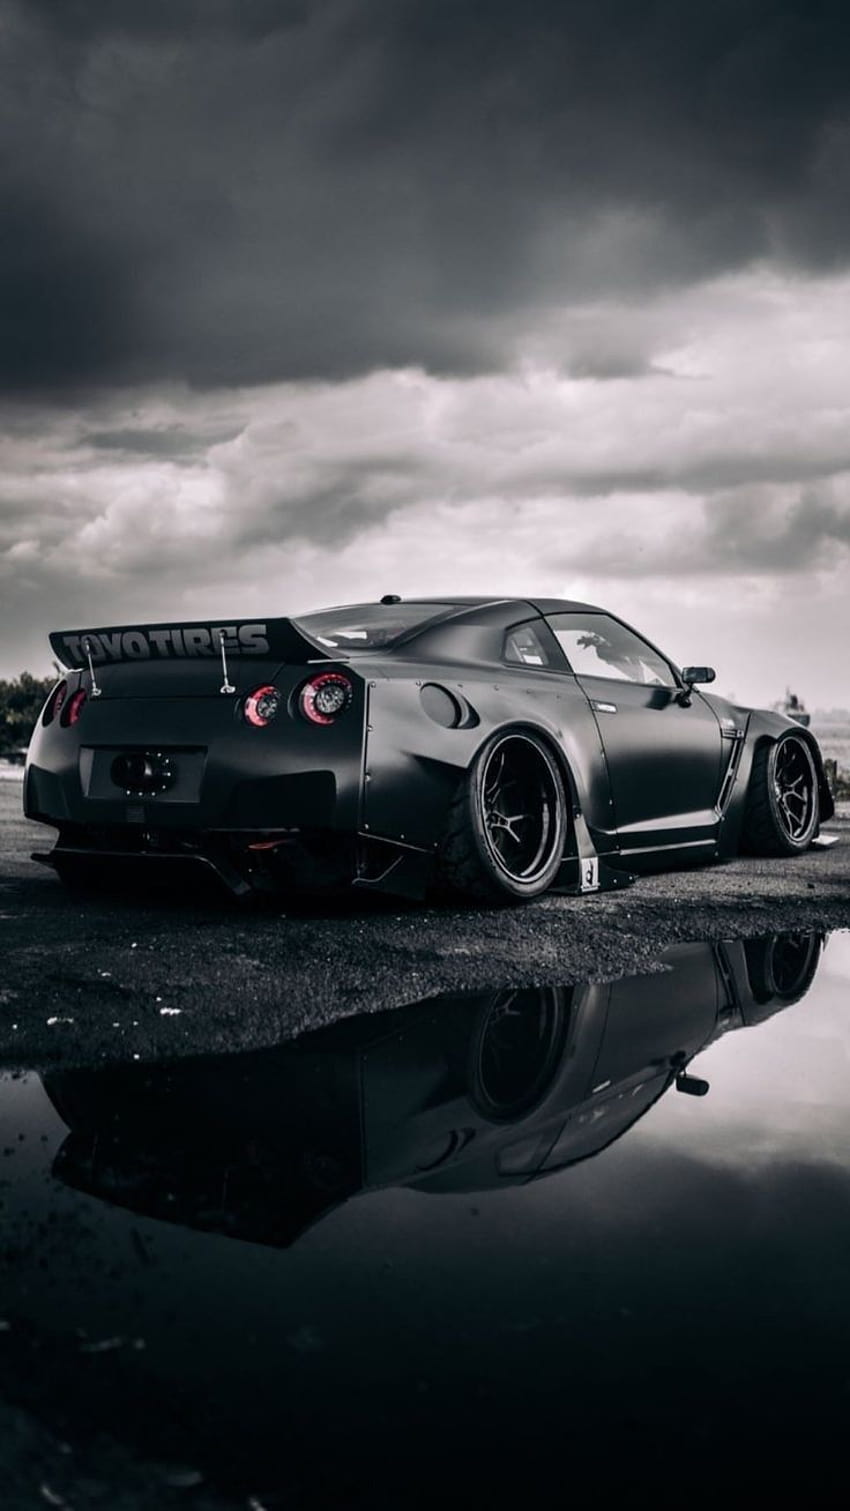 Nissan *R36* Skyline GTR Render. Thoughts? Design by @romanmiah